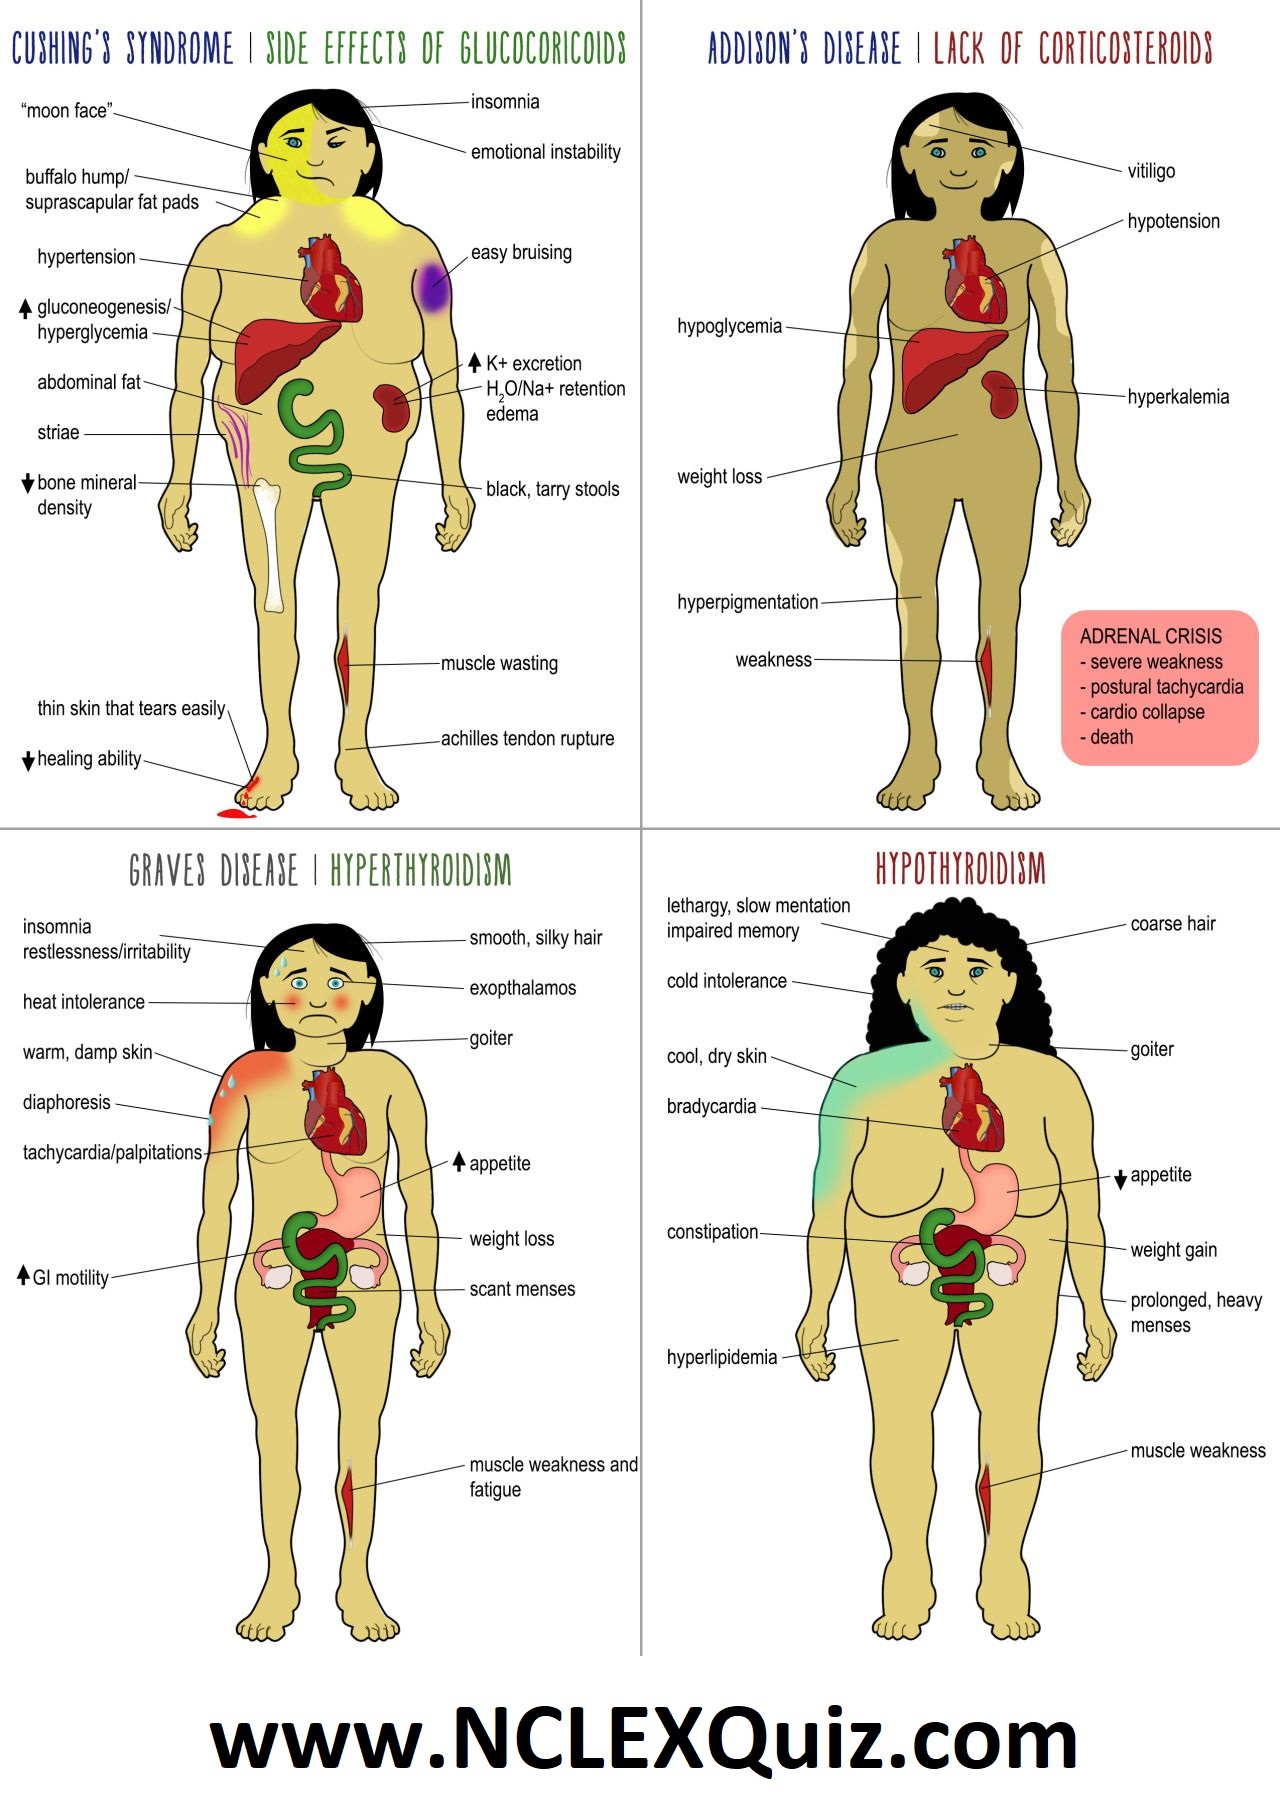 Endocrine Disorders Hypothyroidism and Addison's disease